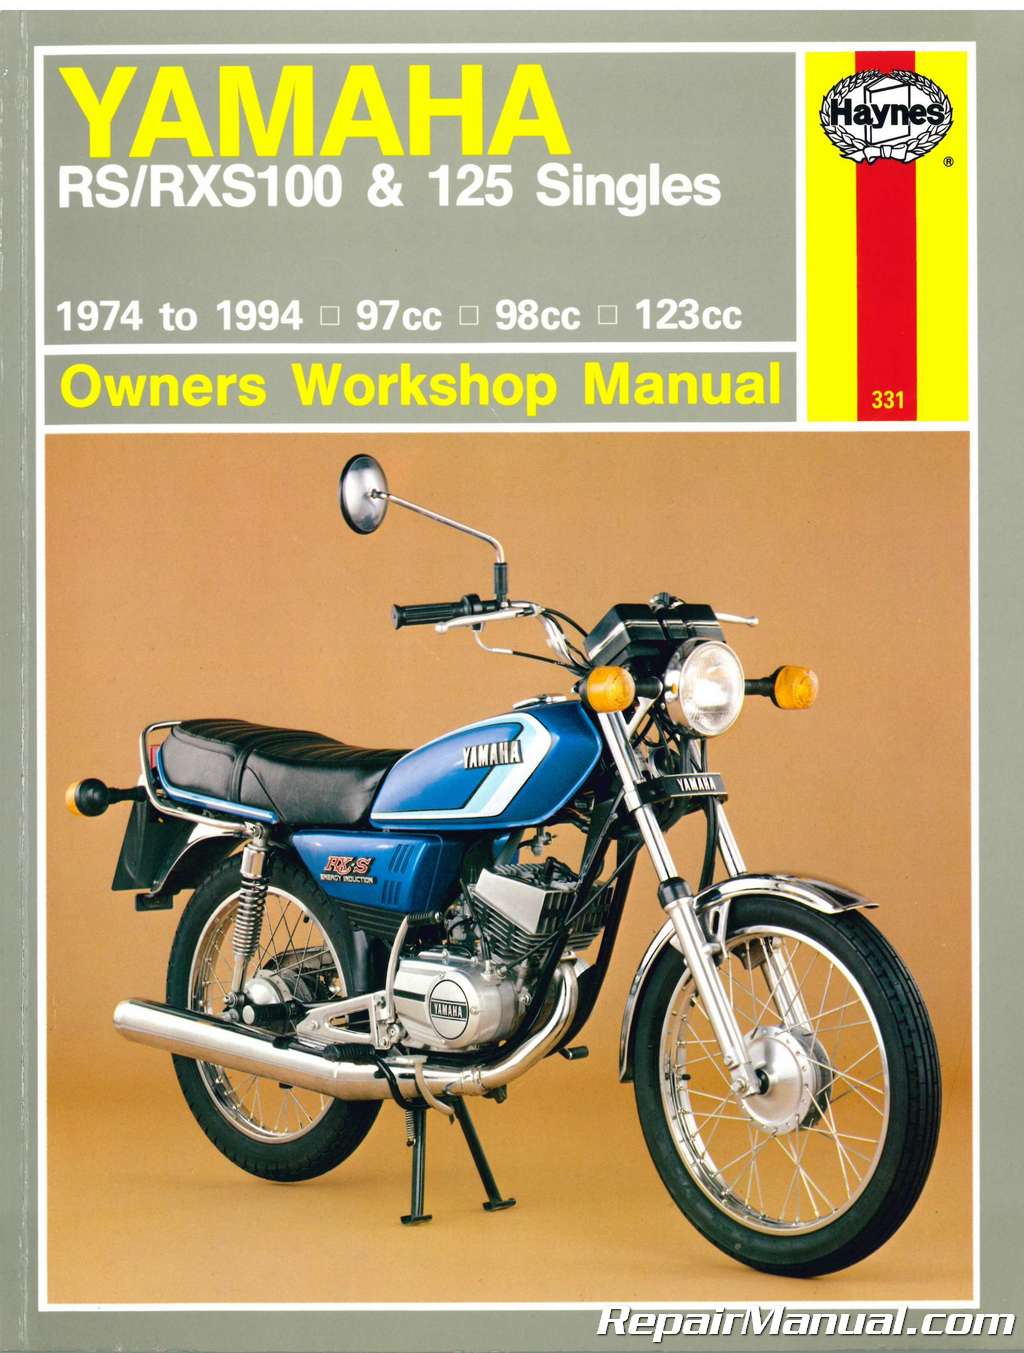 Genuine Yamaha Owners Manual RS100 RS 100 RS100C 1976 LIT-11626-00-03 